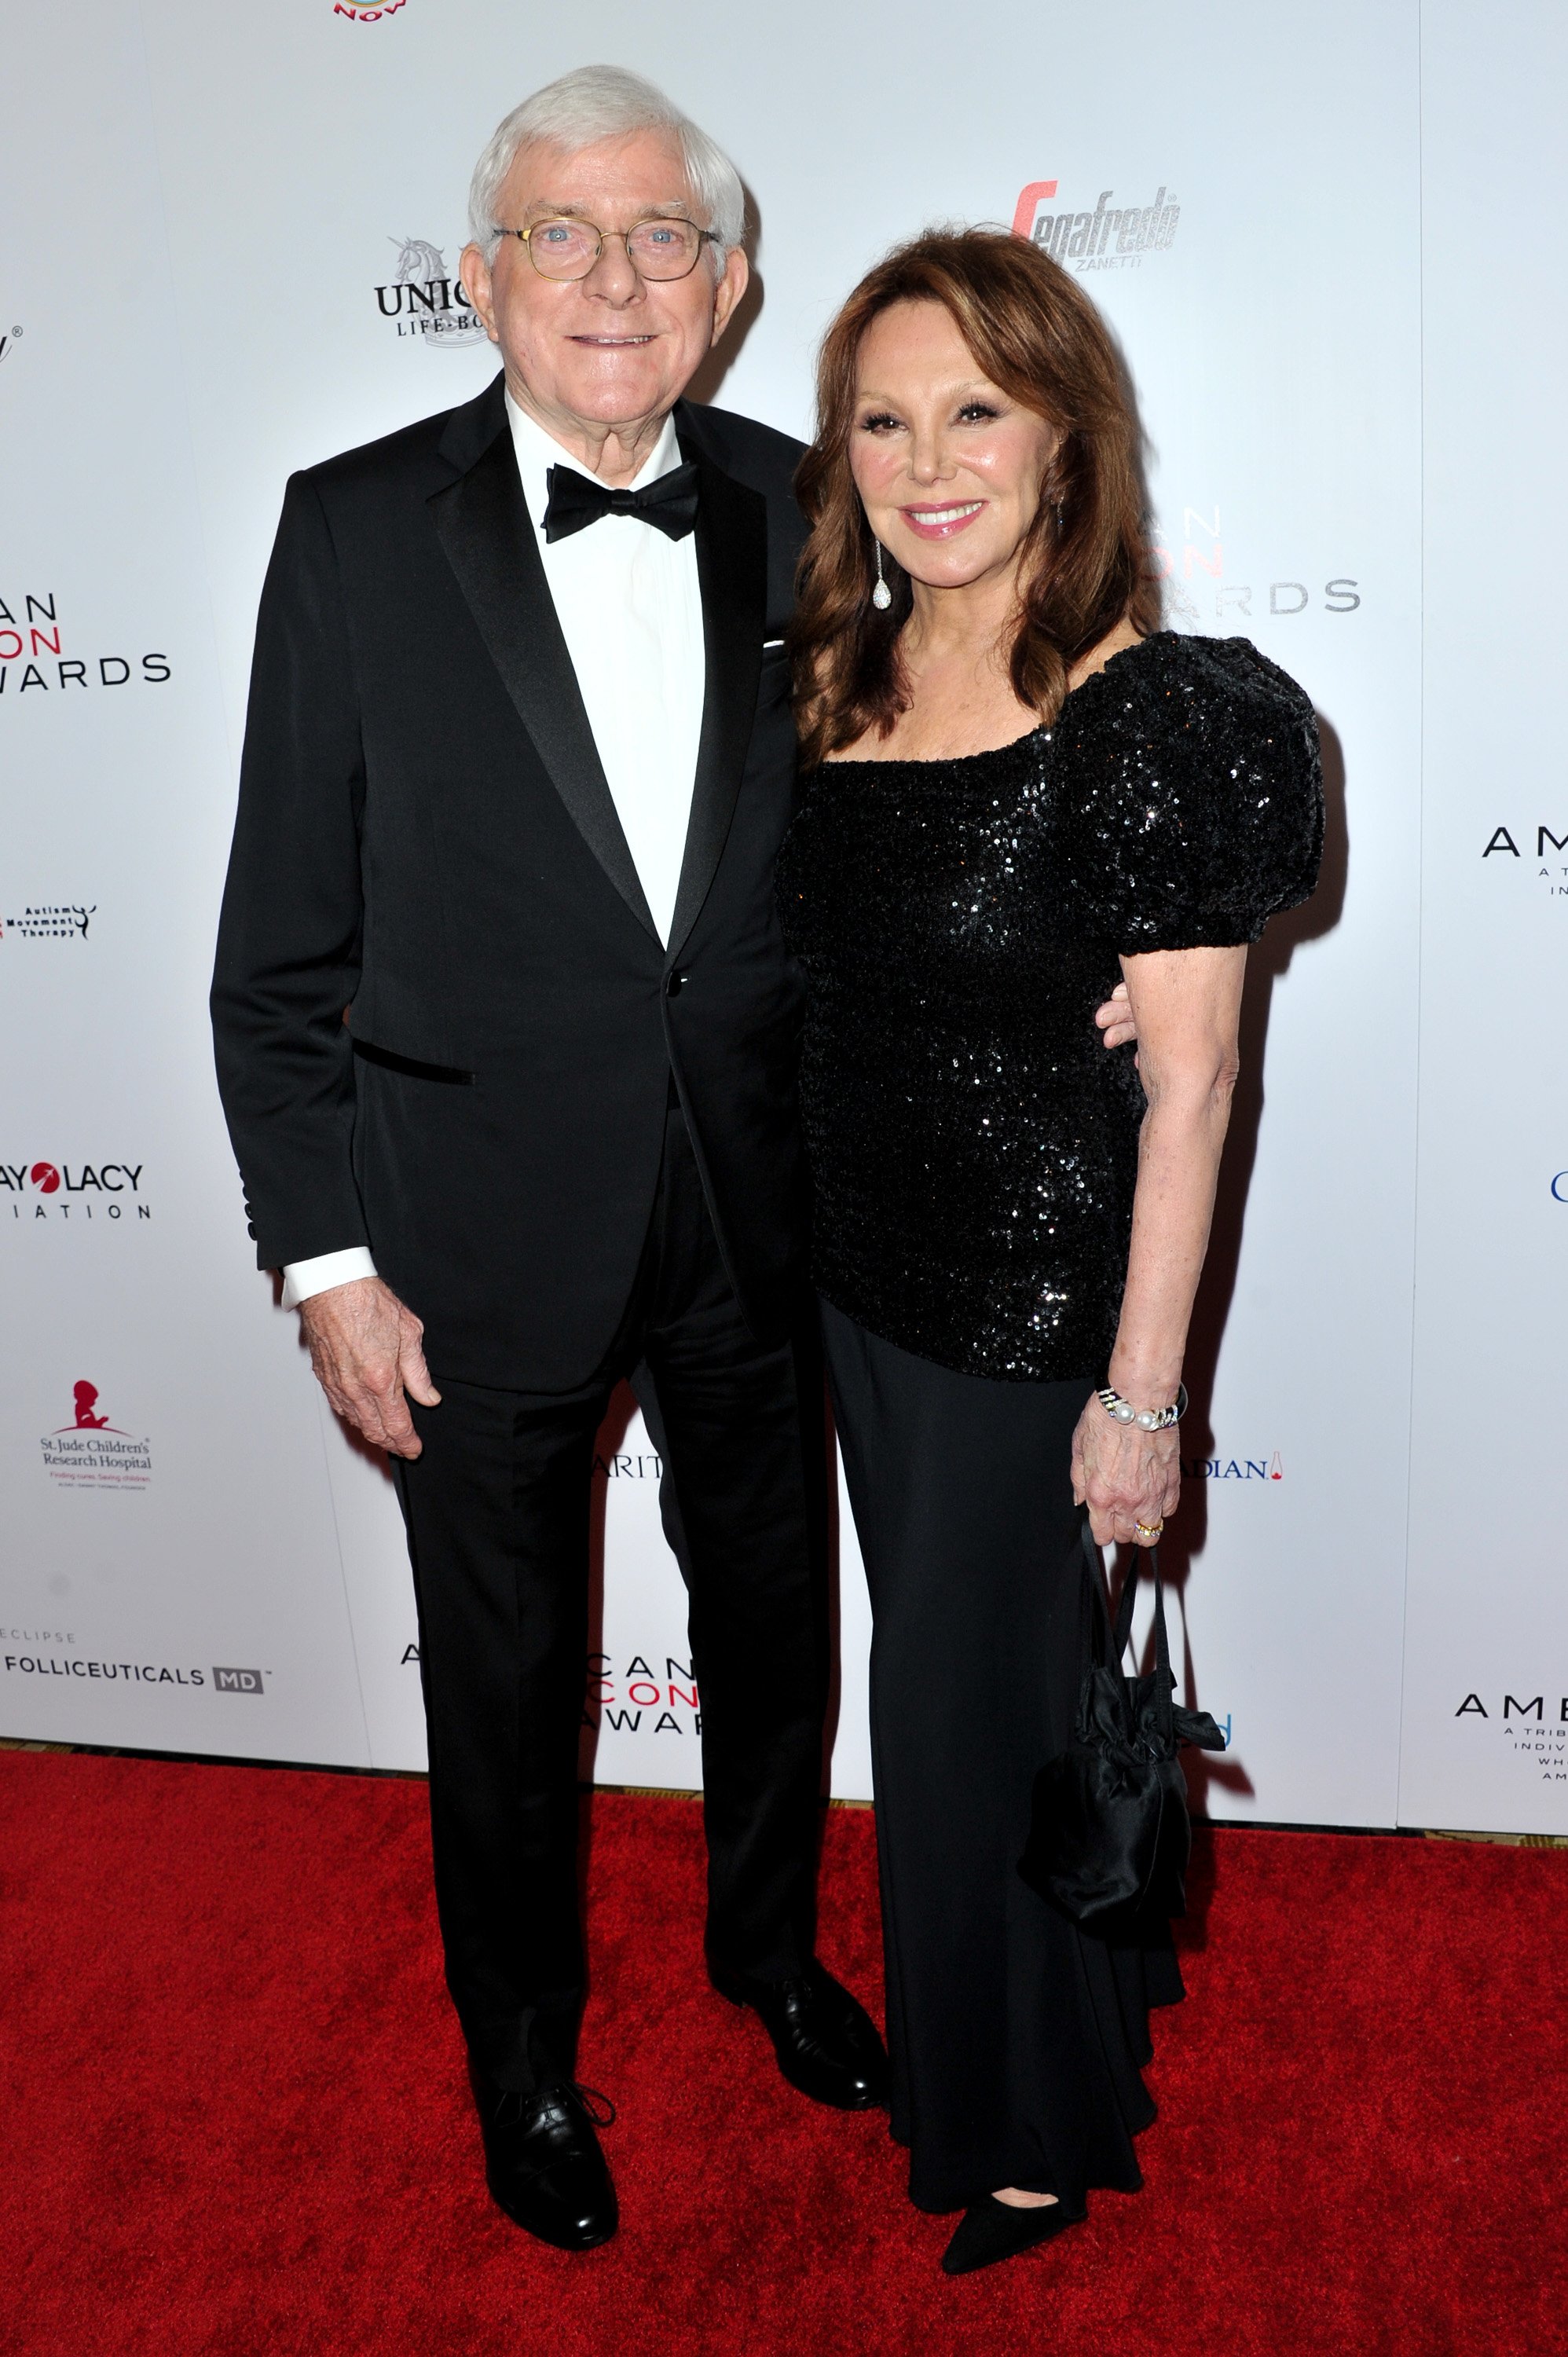 Phil Donahue and Marlo Thomas attend the American Icon Awards at the Beverly Wilshire Four Seasons Hotel | Source: Getty Images